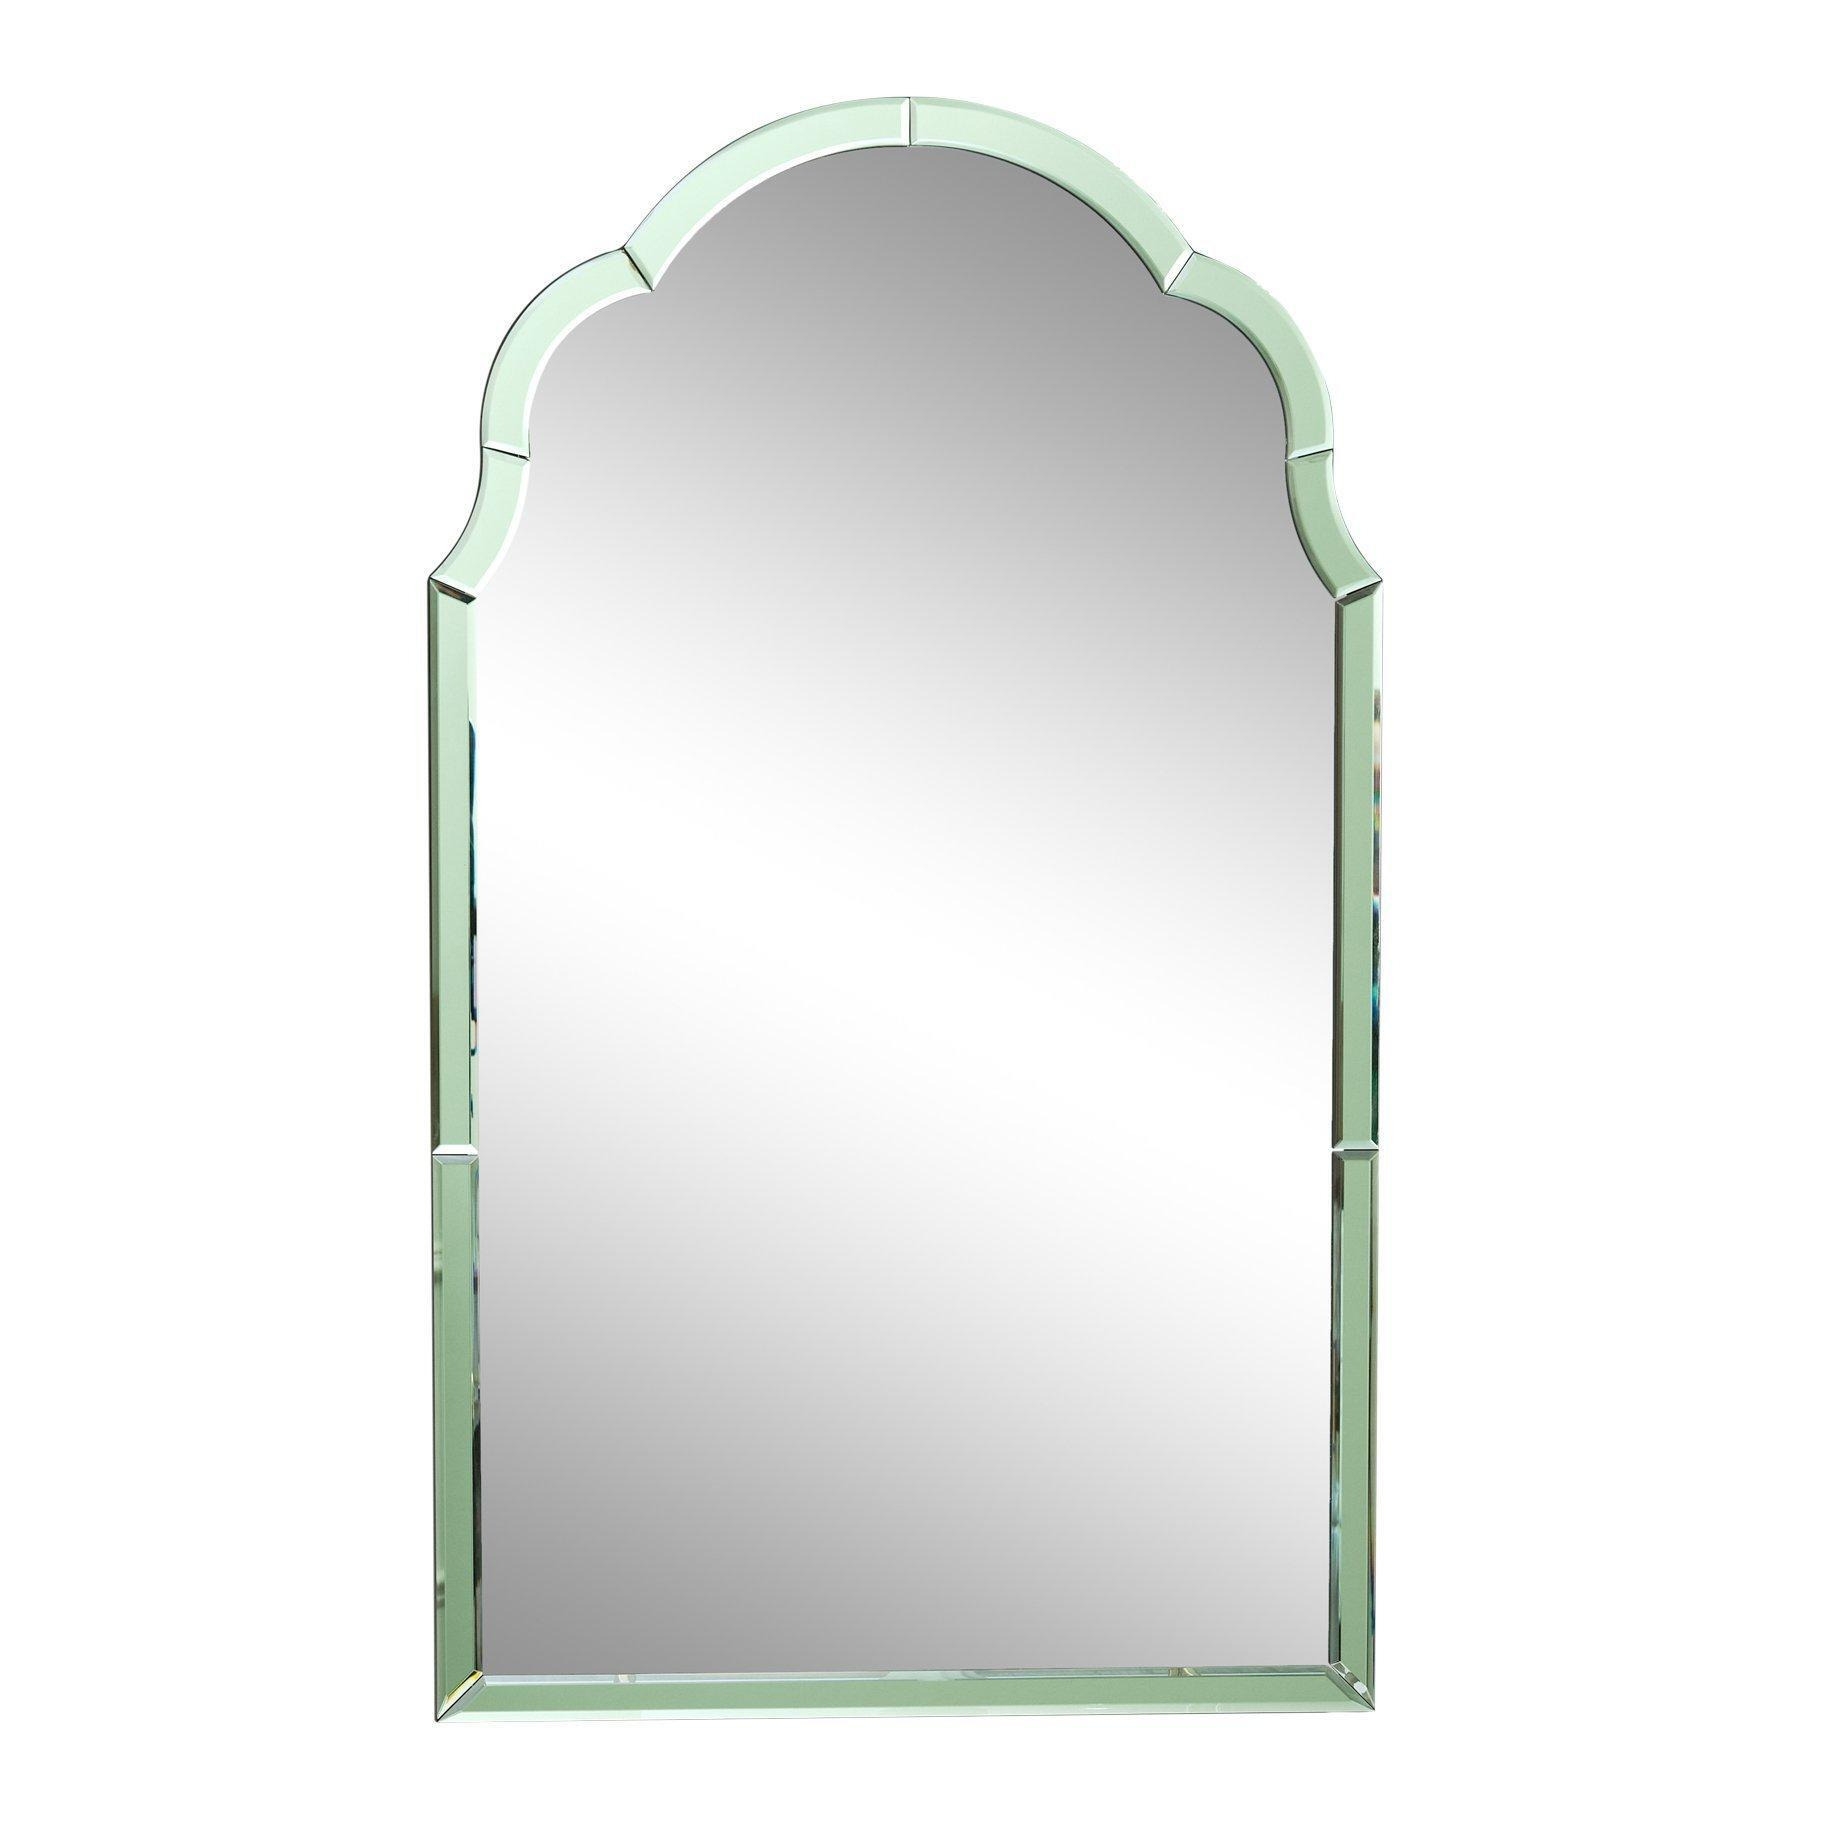 Arched Green Glass Art Deco Wall Mirror 60cm X 101cm - image 1